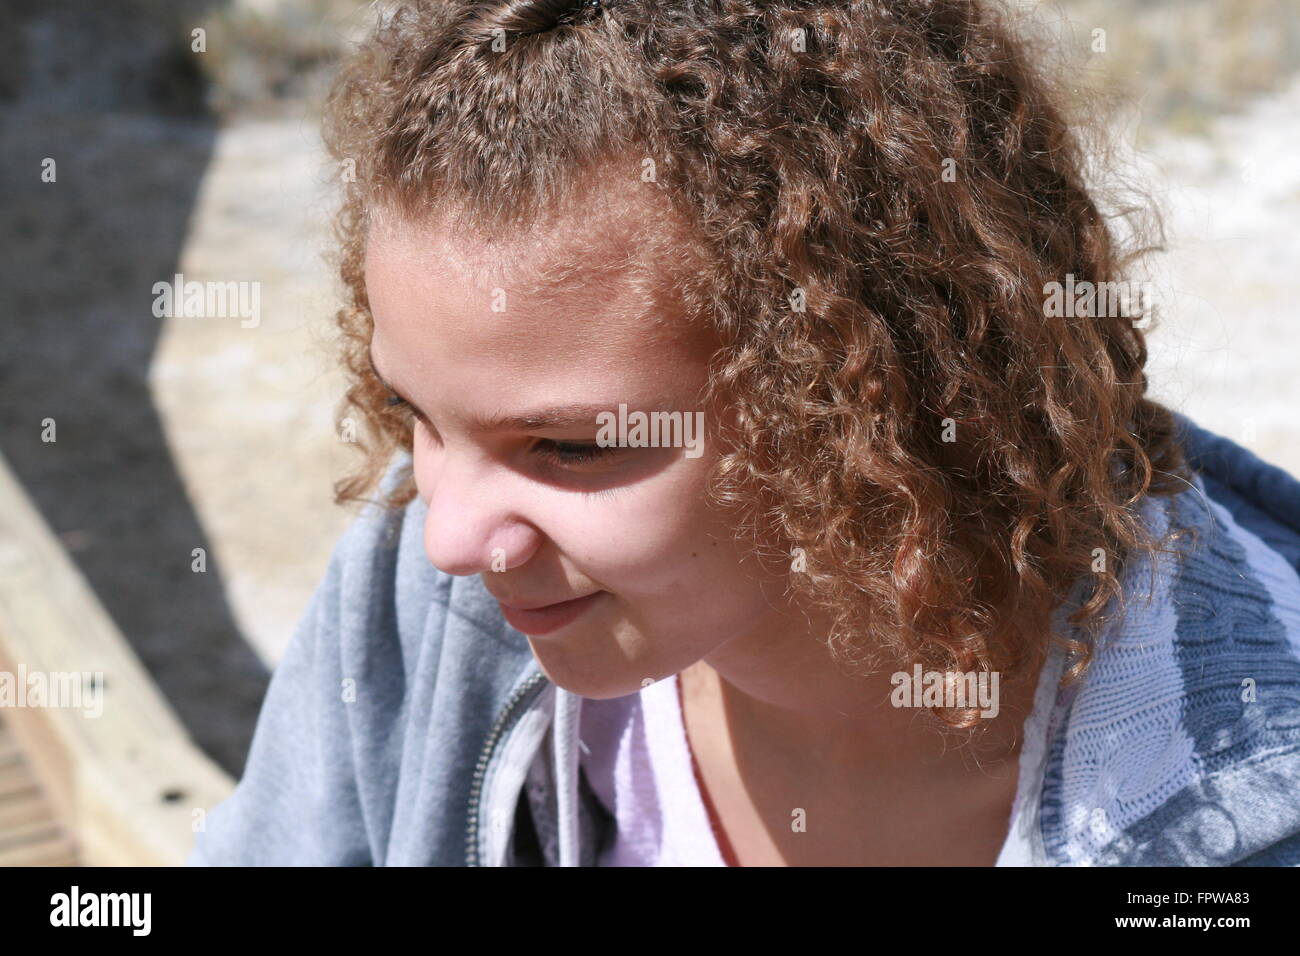 Belle Mixed Race girl sitting outdoors Banque D'Images